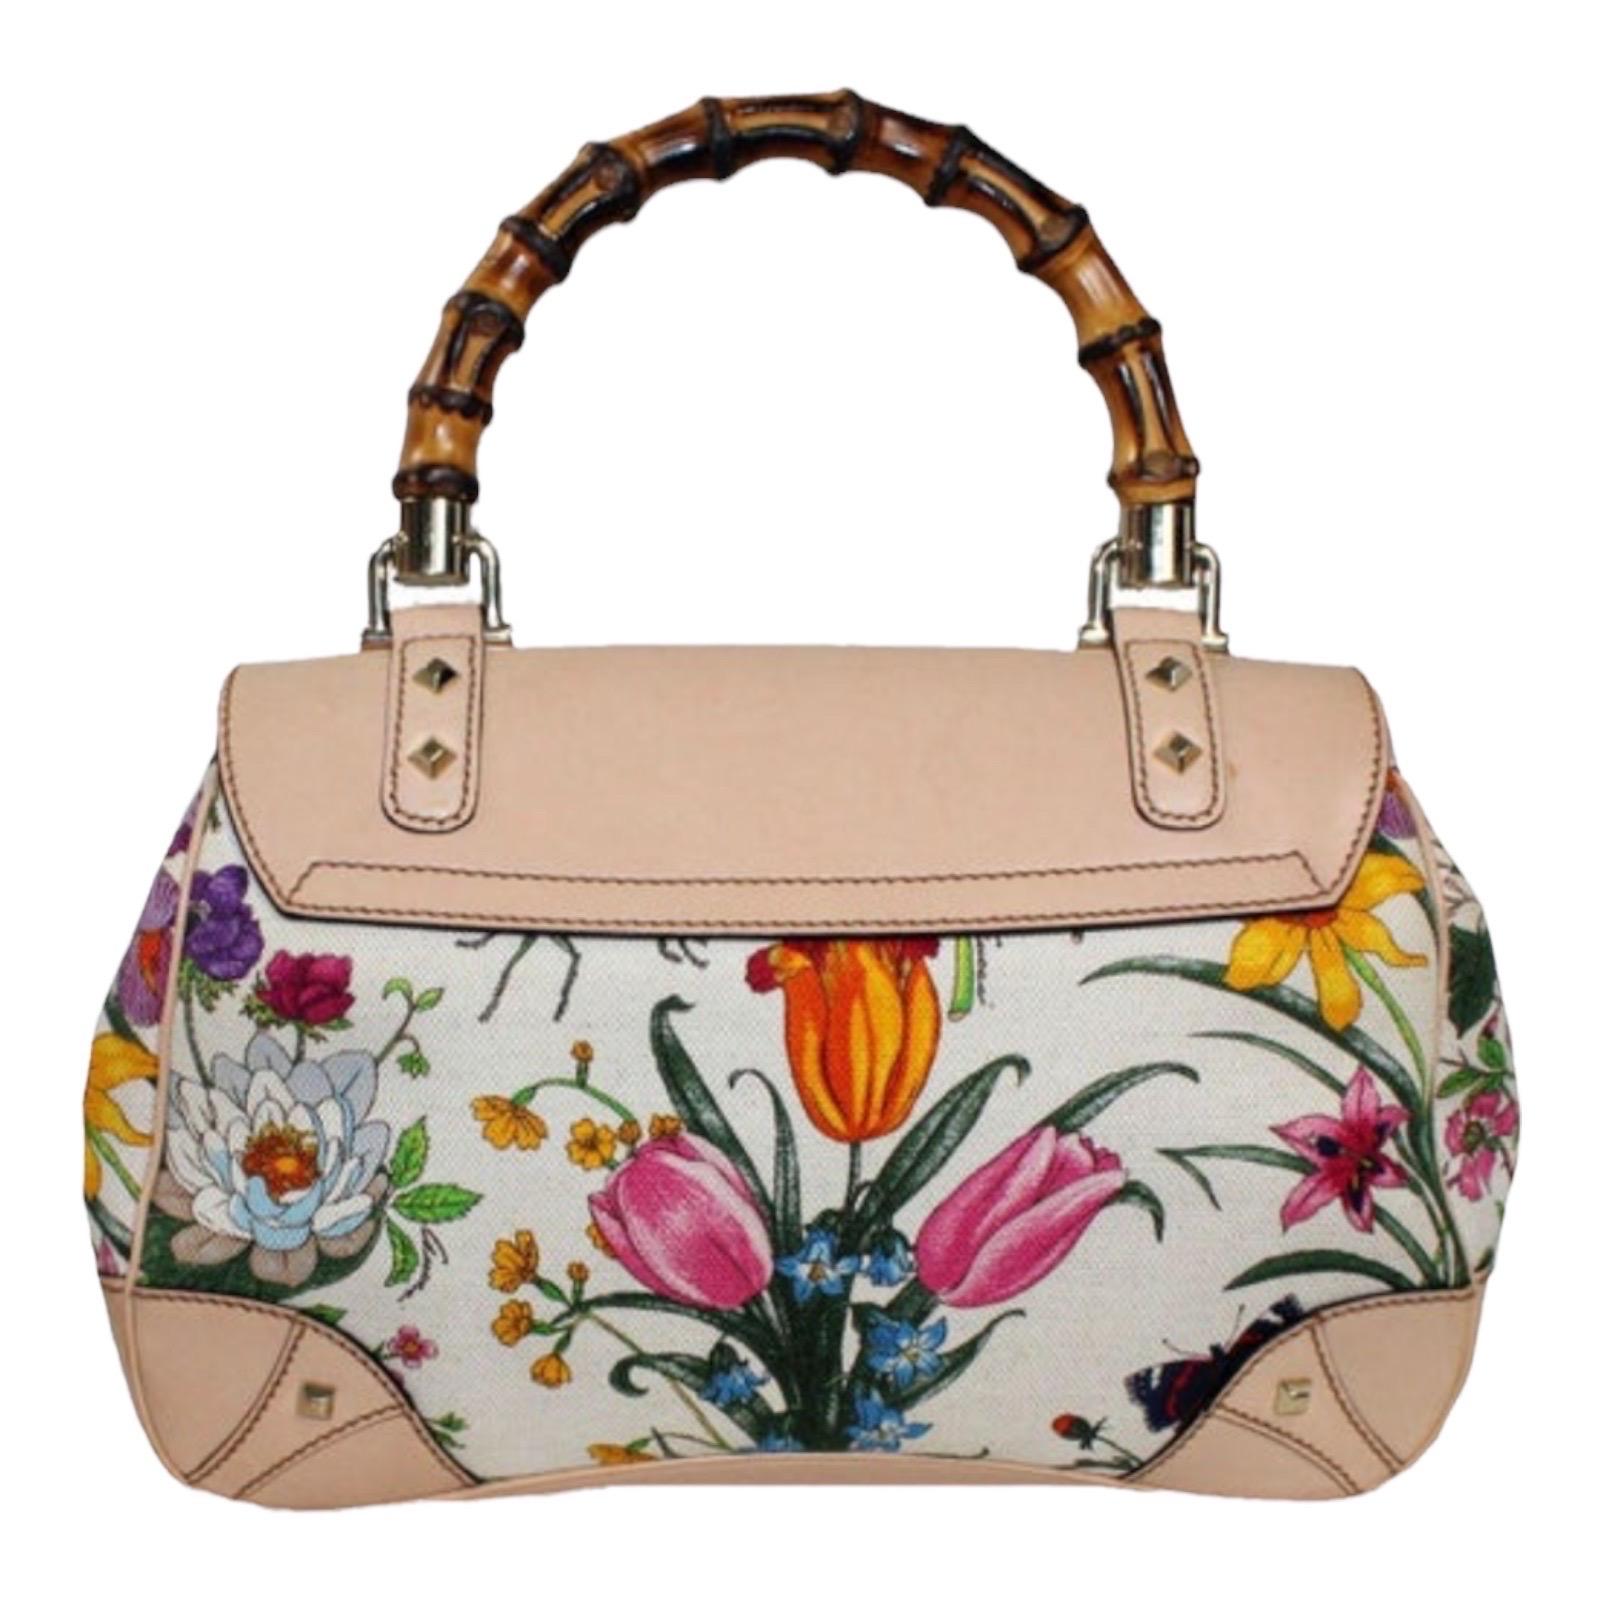 A stunning GUCCI signature piece that will last you for many years
Timeless classic - a true beauty!
From one of GUCCI's most stunning collections in the famous GUCCI FLORA print
Already now part of the museum collection of GUCCI MUSEO - An